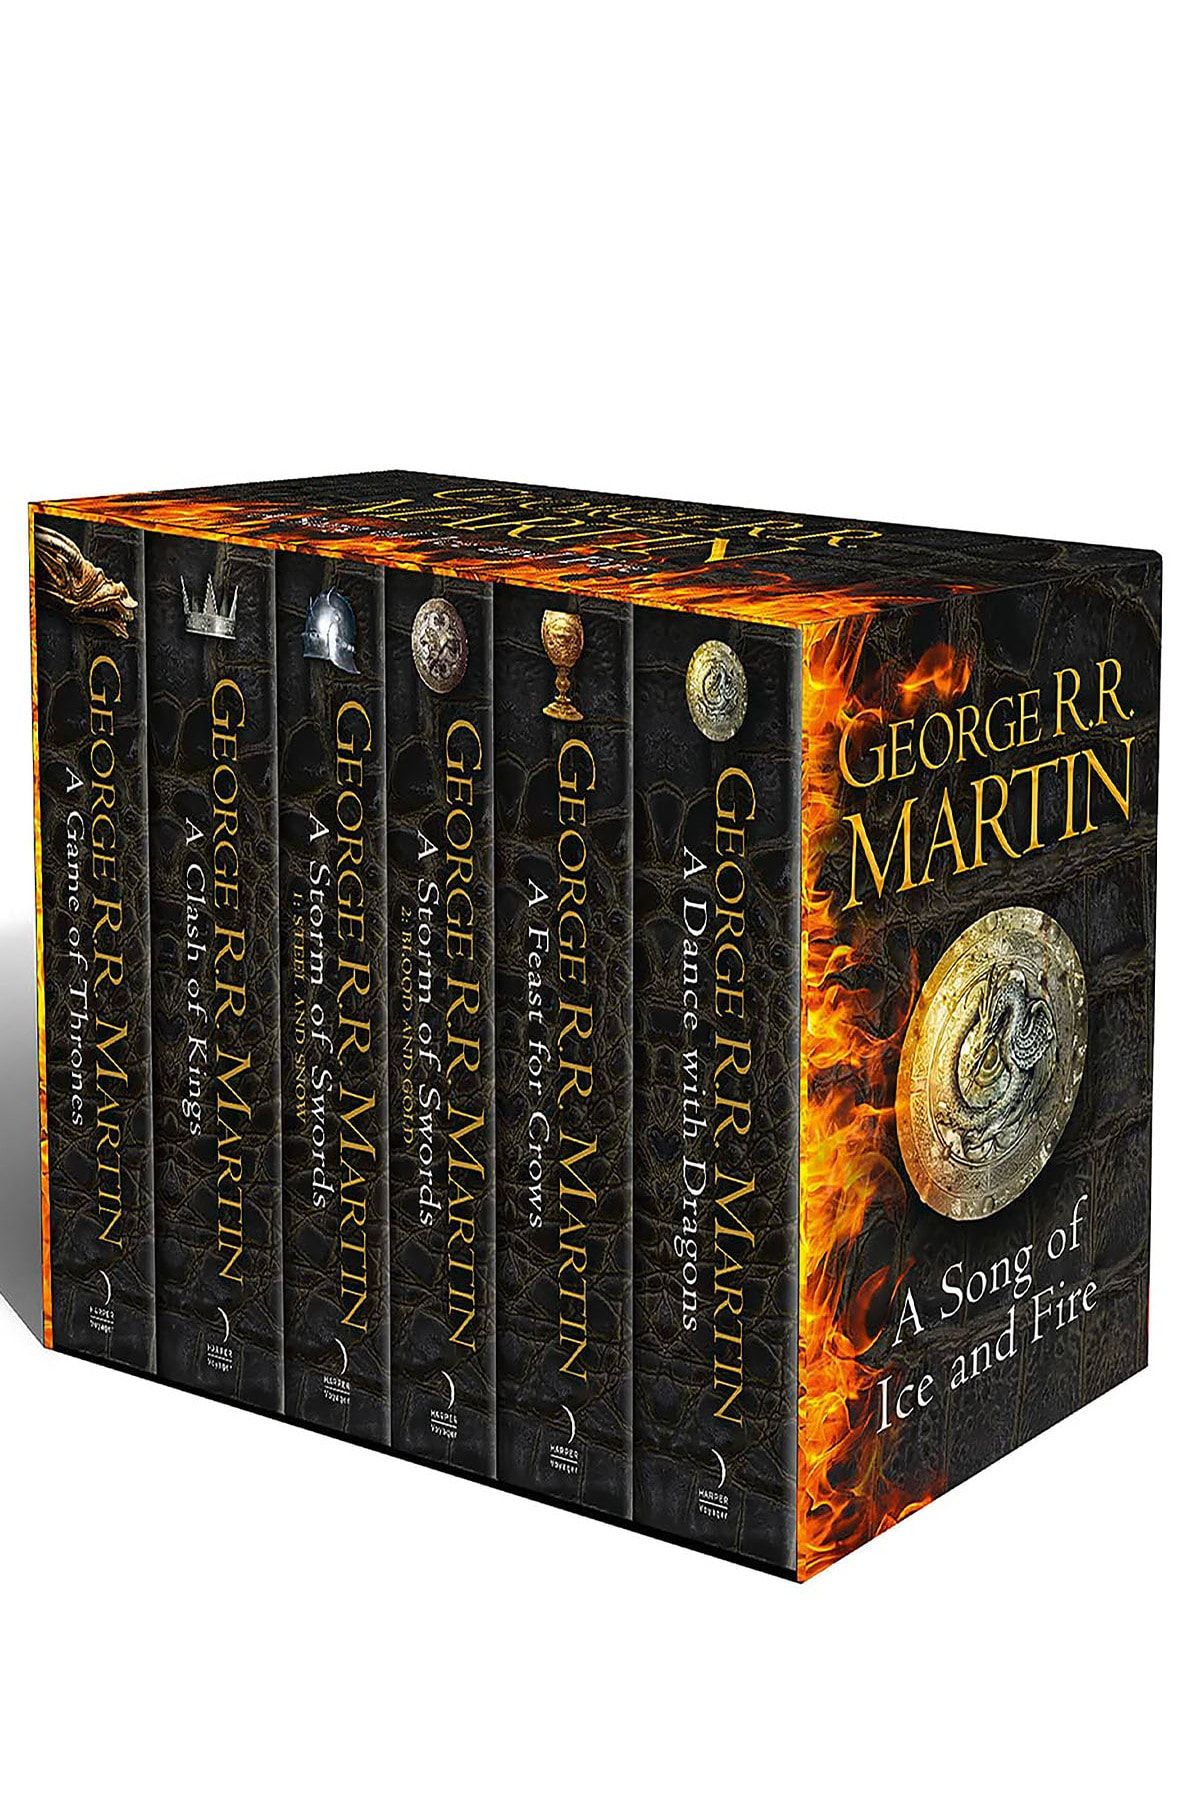 Harper The complete boxset of all 6 books (A Song of Ice and Fire)